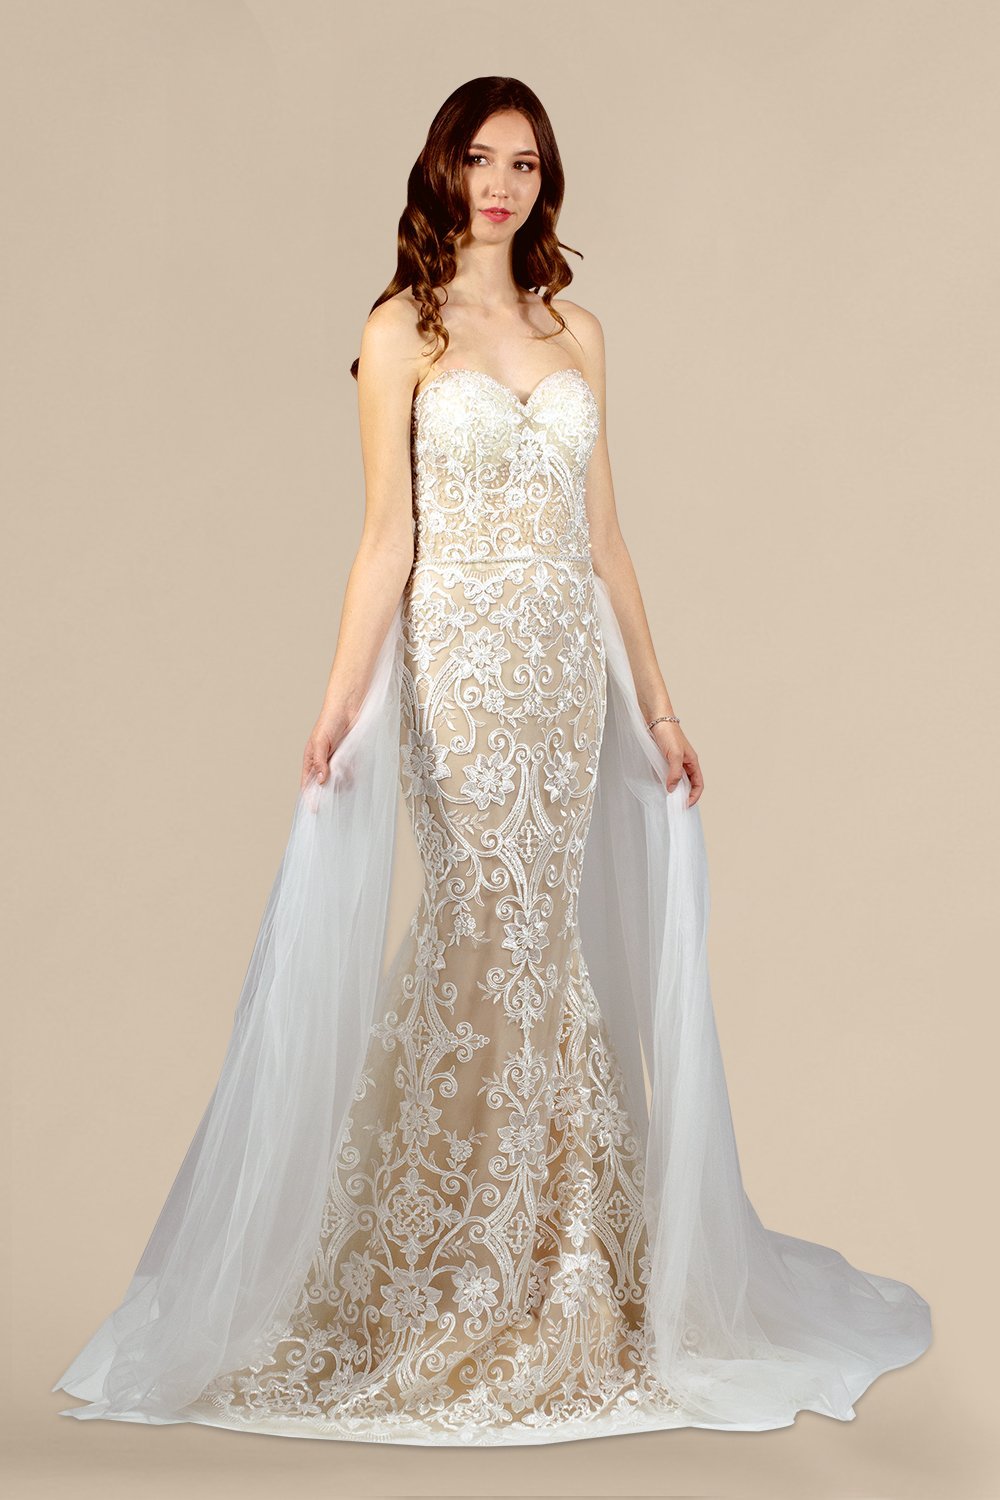 KRISTALINA  Ivory/Nude Lace Wedding Gown With Detachable Skirt – Envious  Bridal & Formal